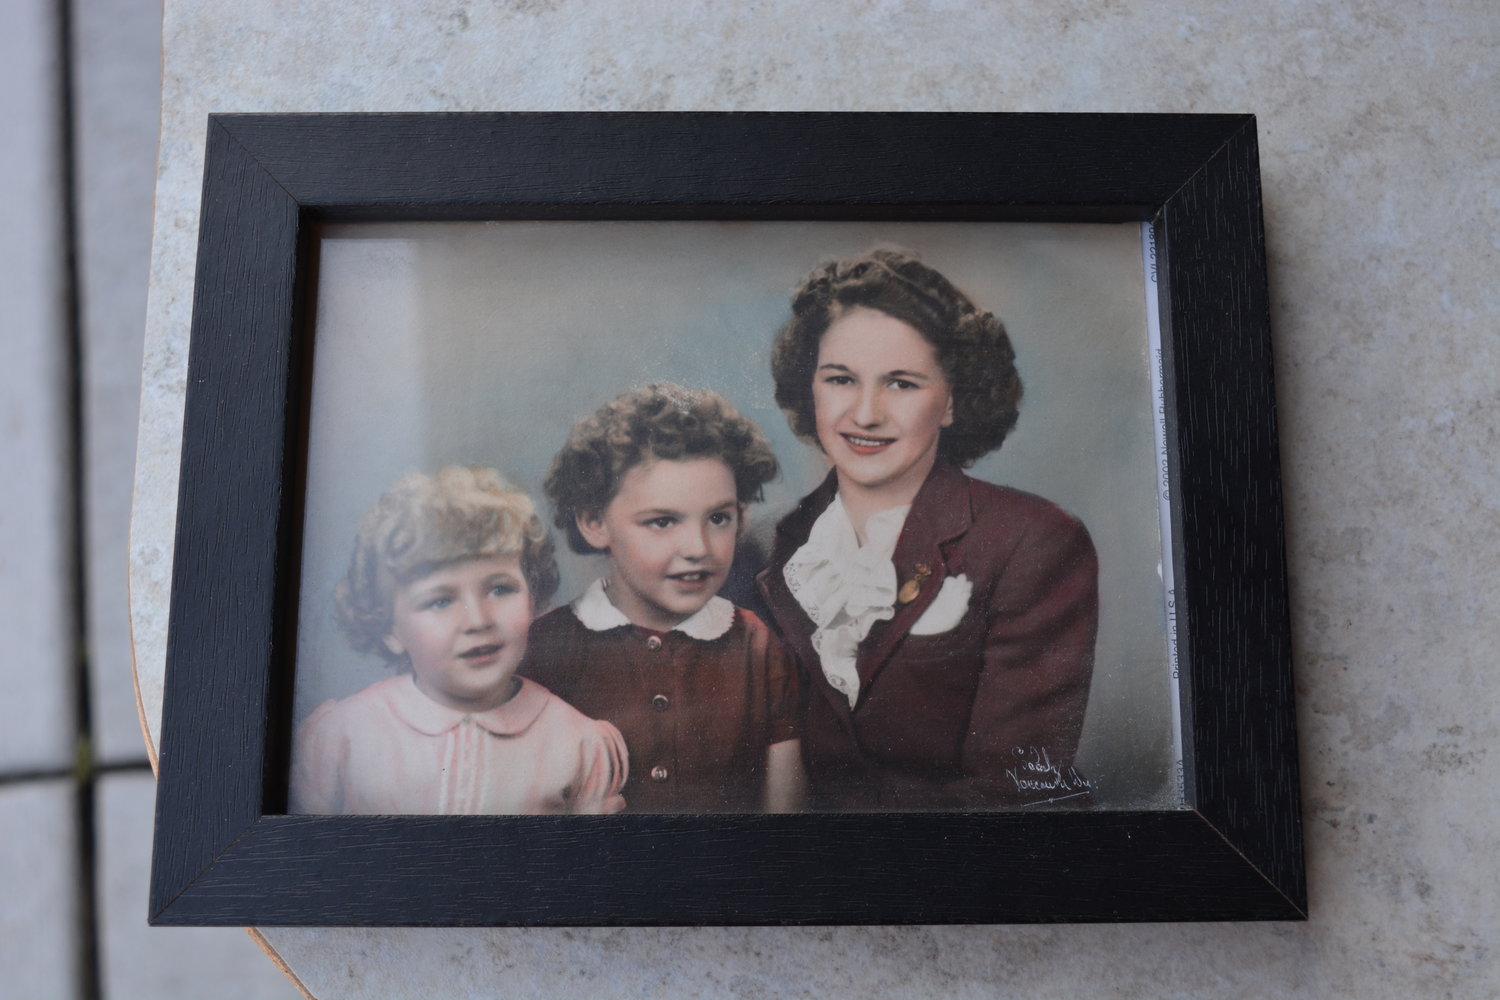 Helen (right) sits with her two daughters Gloria (left) and Ruthie during a photo taken around 1945 to 1946.